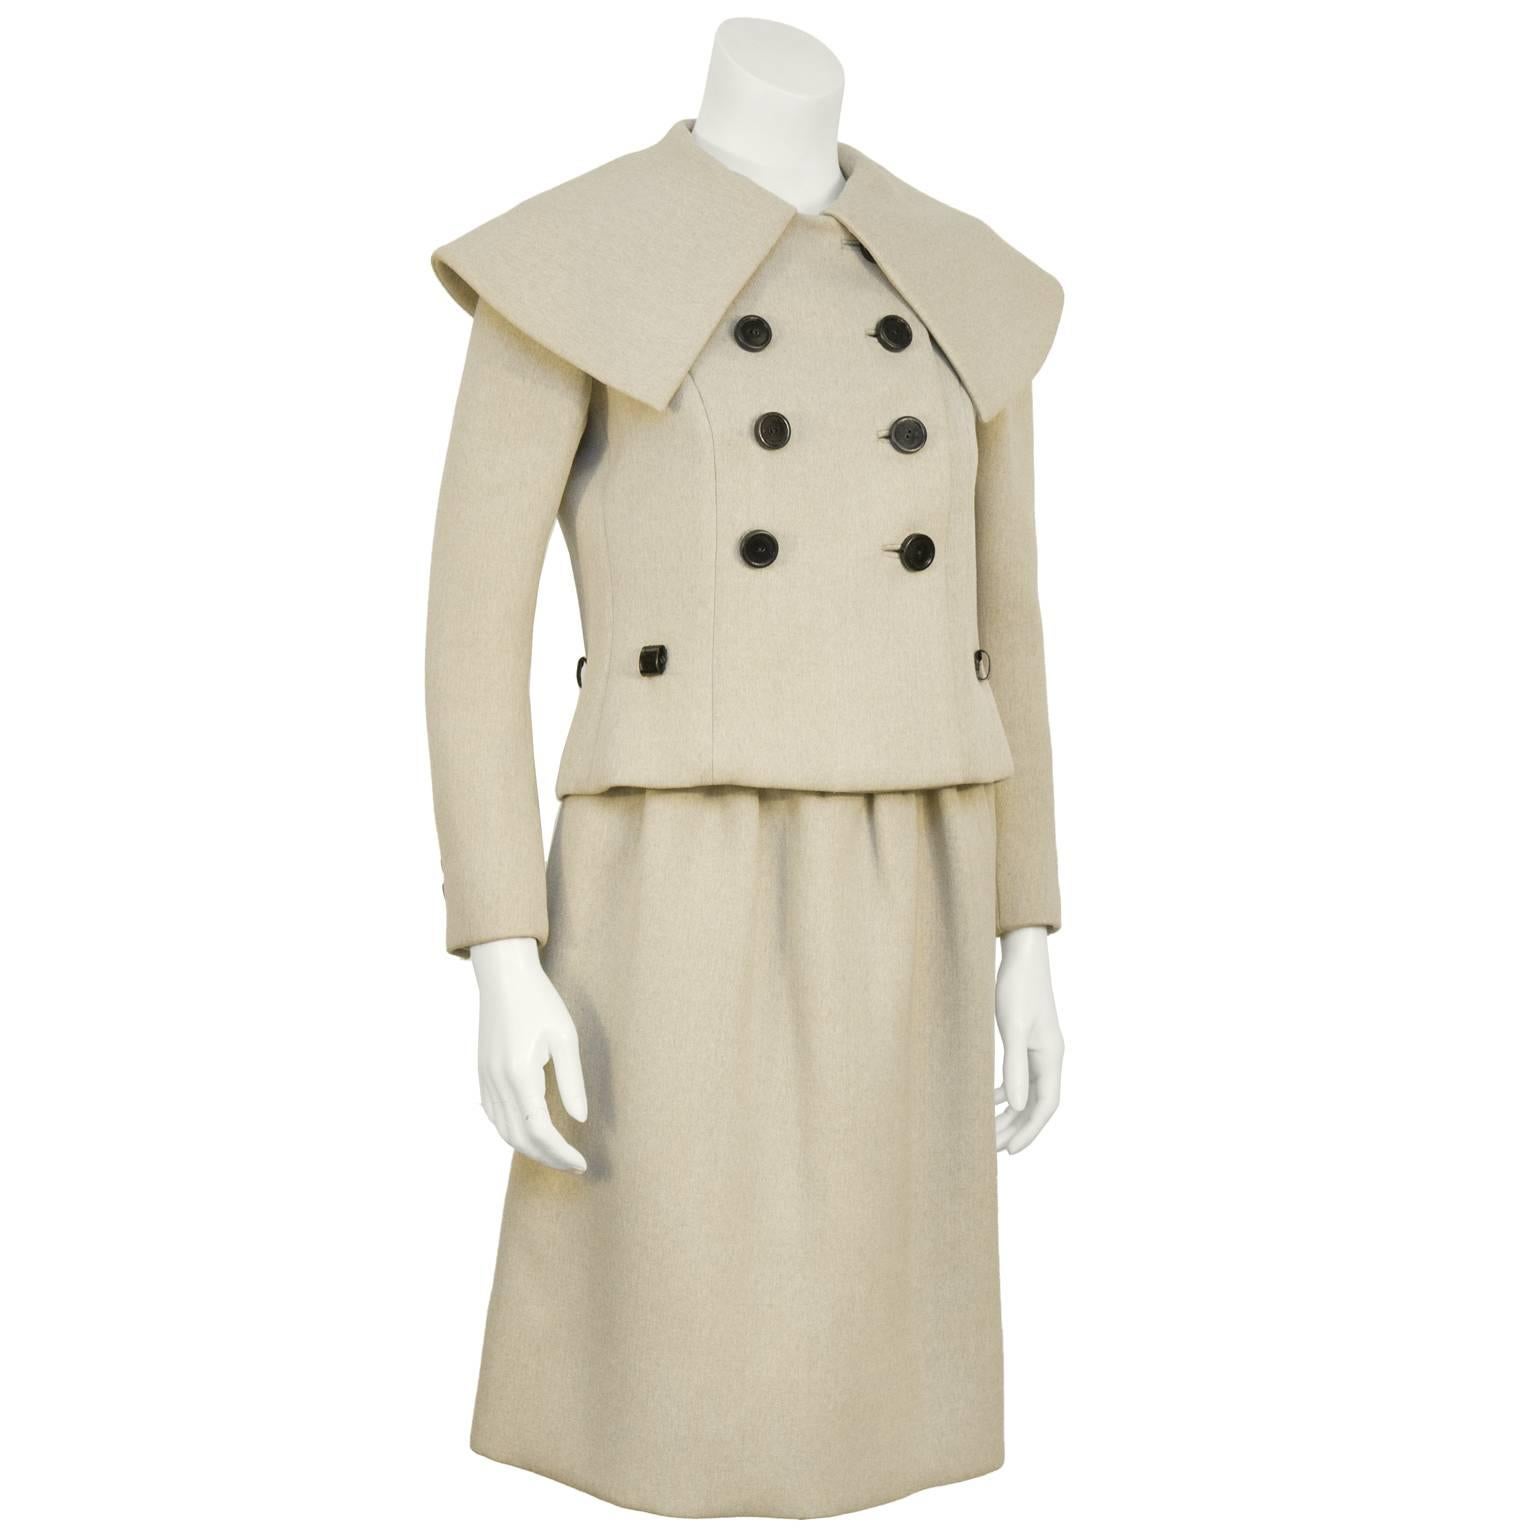 Norell beige mid-weight wool skirt suit from the 1960's. The double breasted jacket features a pilgrim collar and 6 large black circular buttons down the front. The black patent leather belt loops on the front and the side fits a skinny belt.